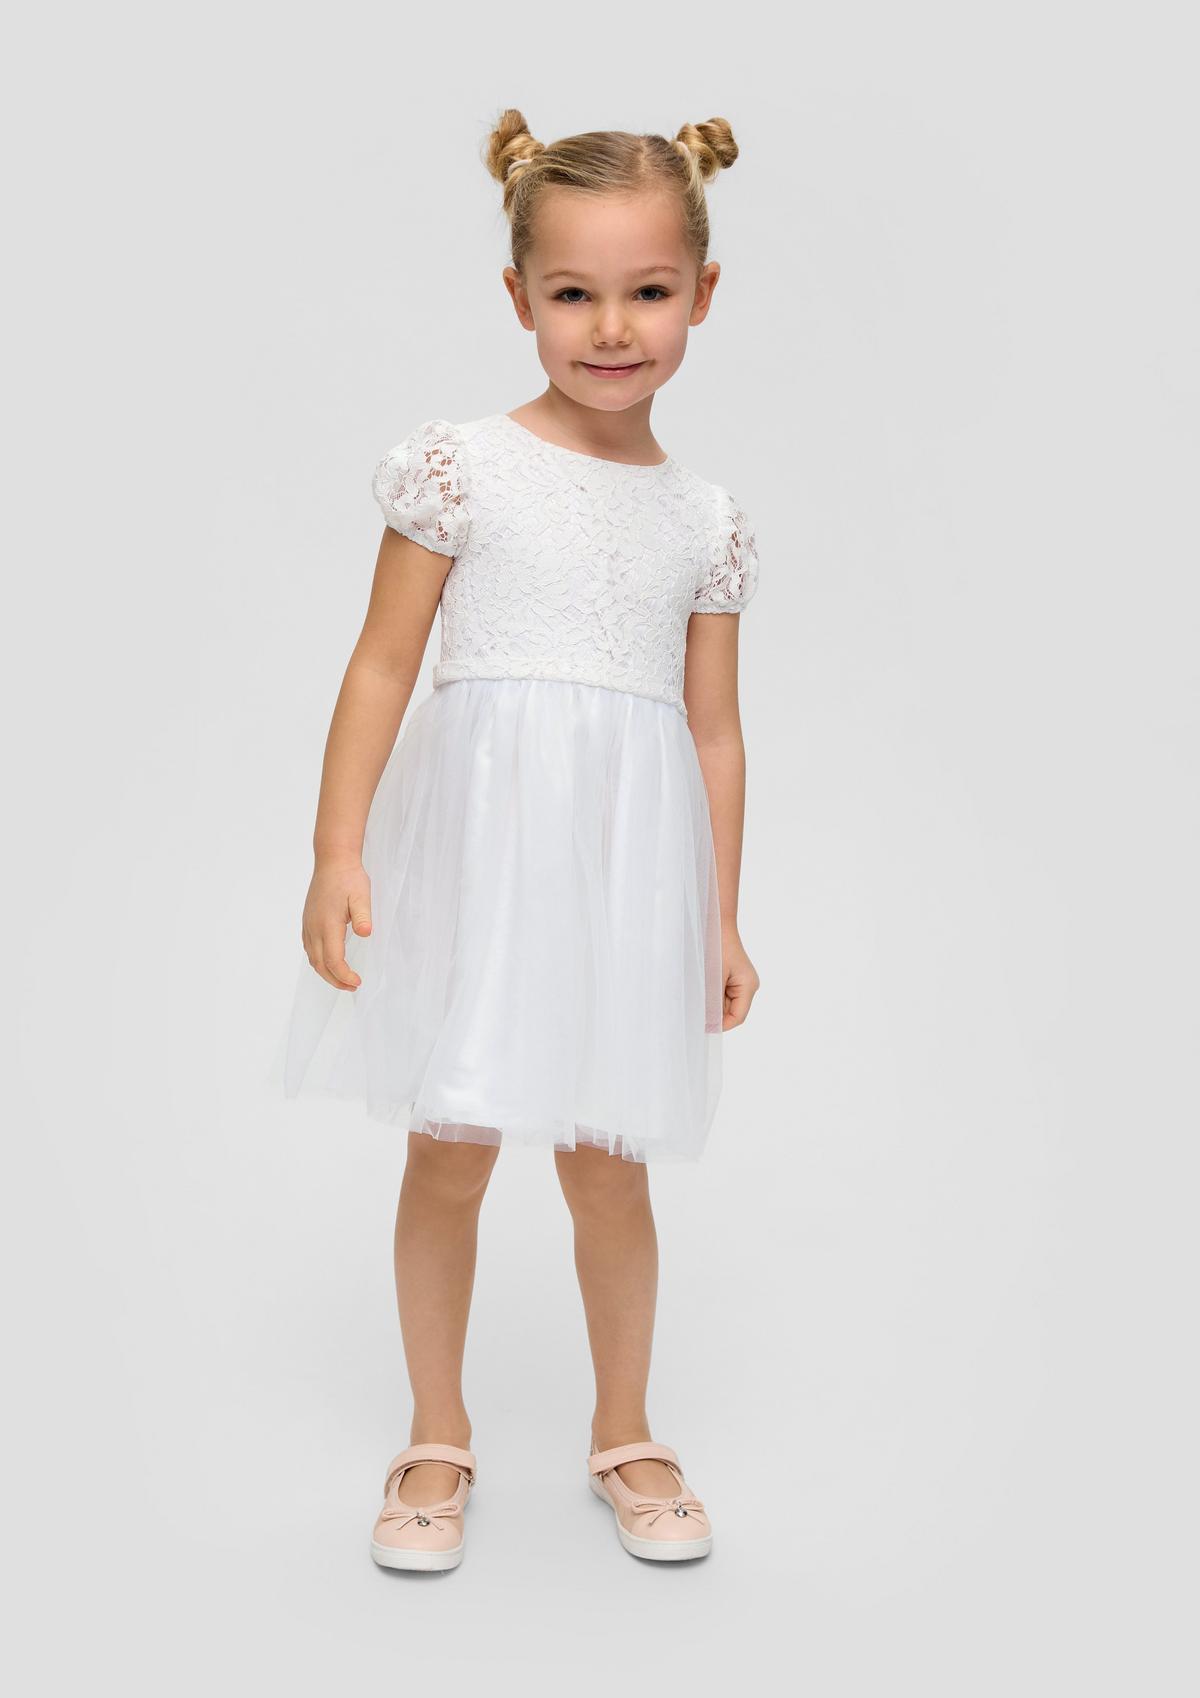 s.Oliver Formal dress made of lace and tulle